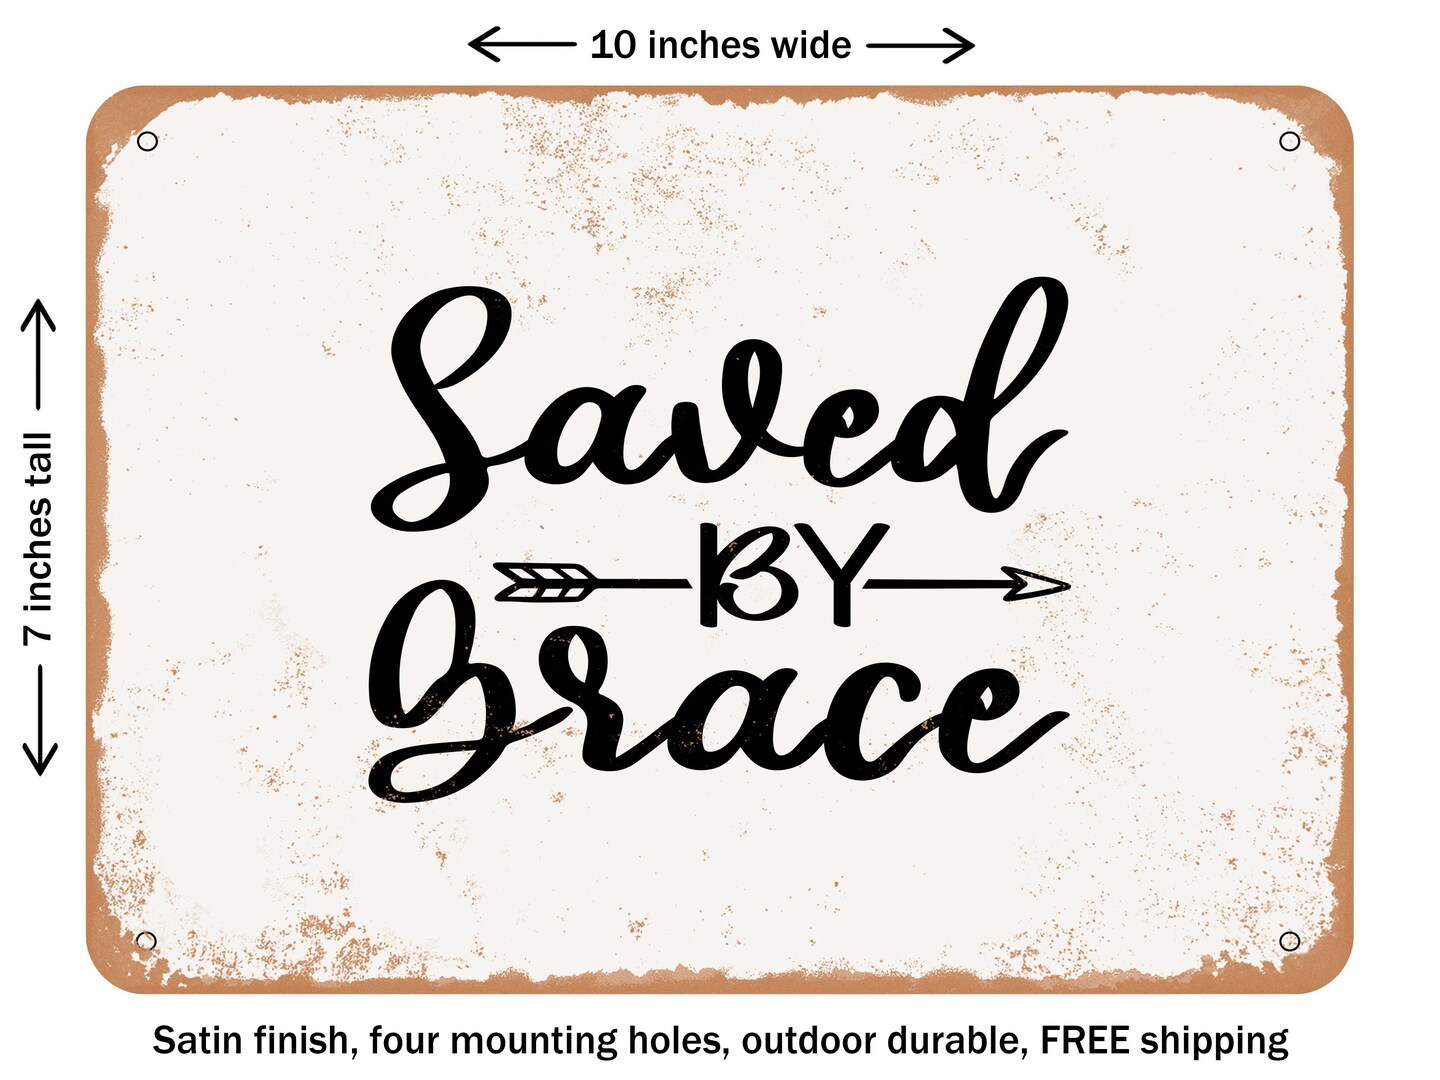 DECORATIVE METAL SIGN - Saved by Grase - Vintage Rusty Look